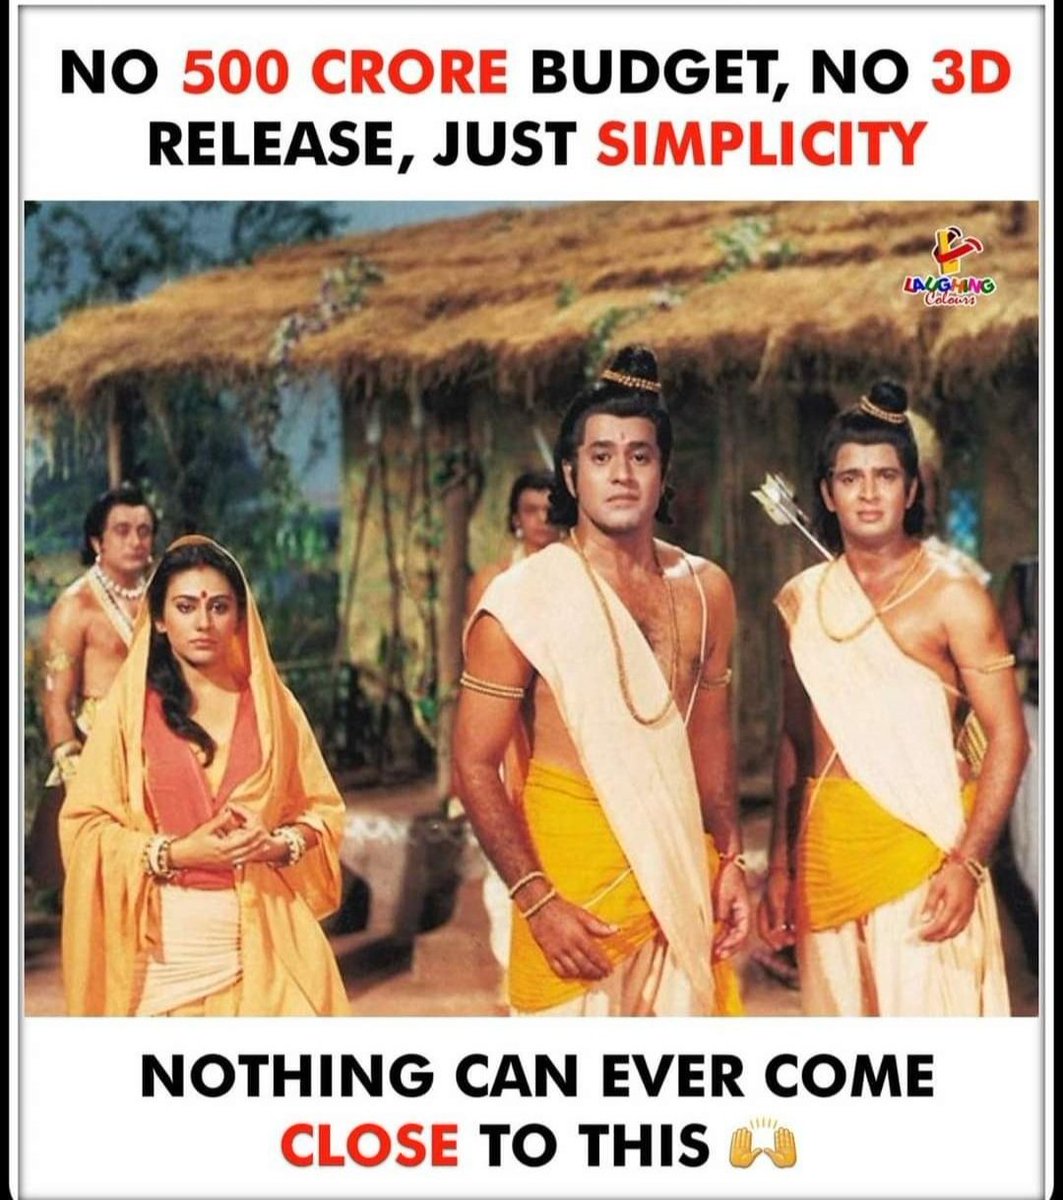 Old is gold 🚩💯 500cr movie,3D,nd VFX can't take place of this old Ramayan serial. #Boycottadipursh #BoycottBollywood